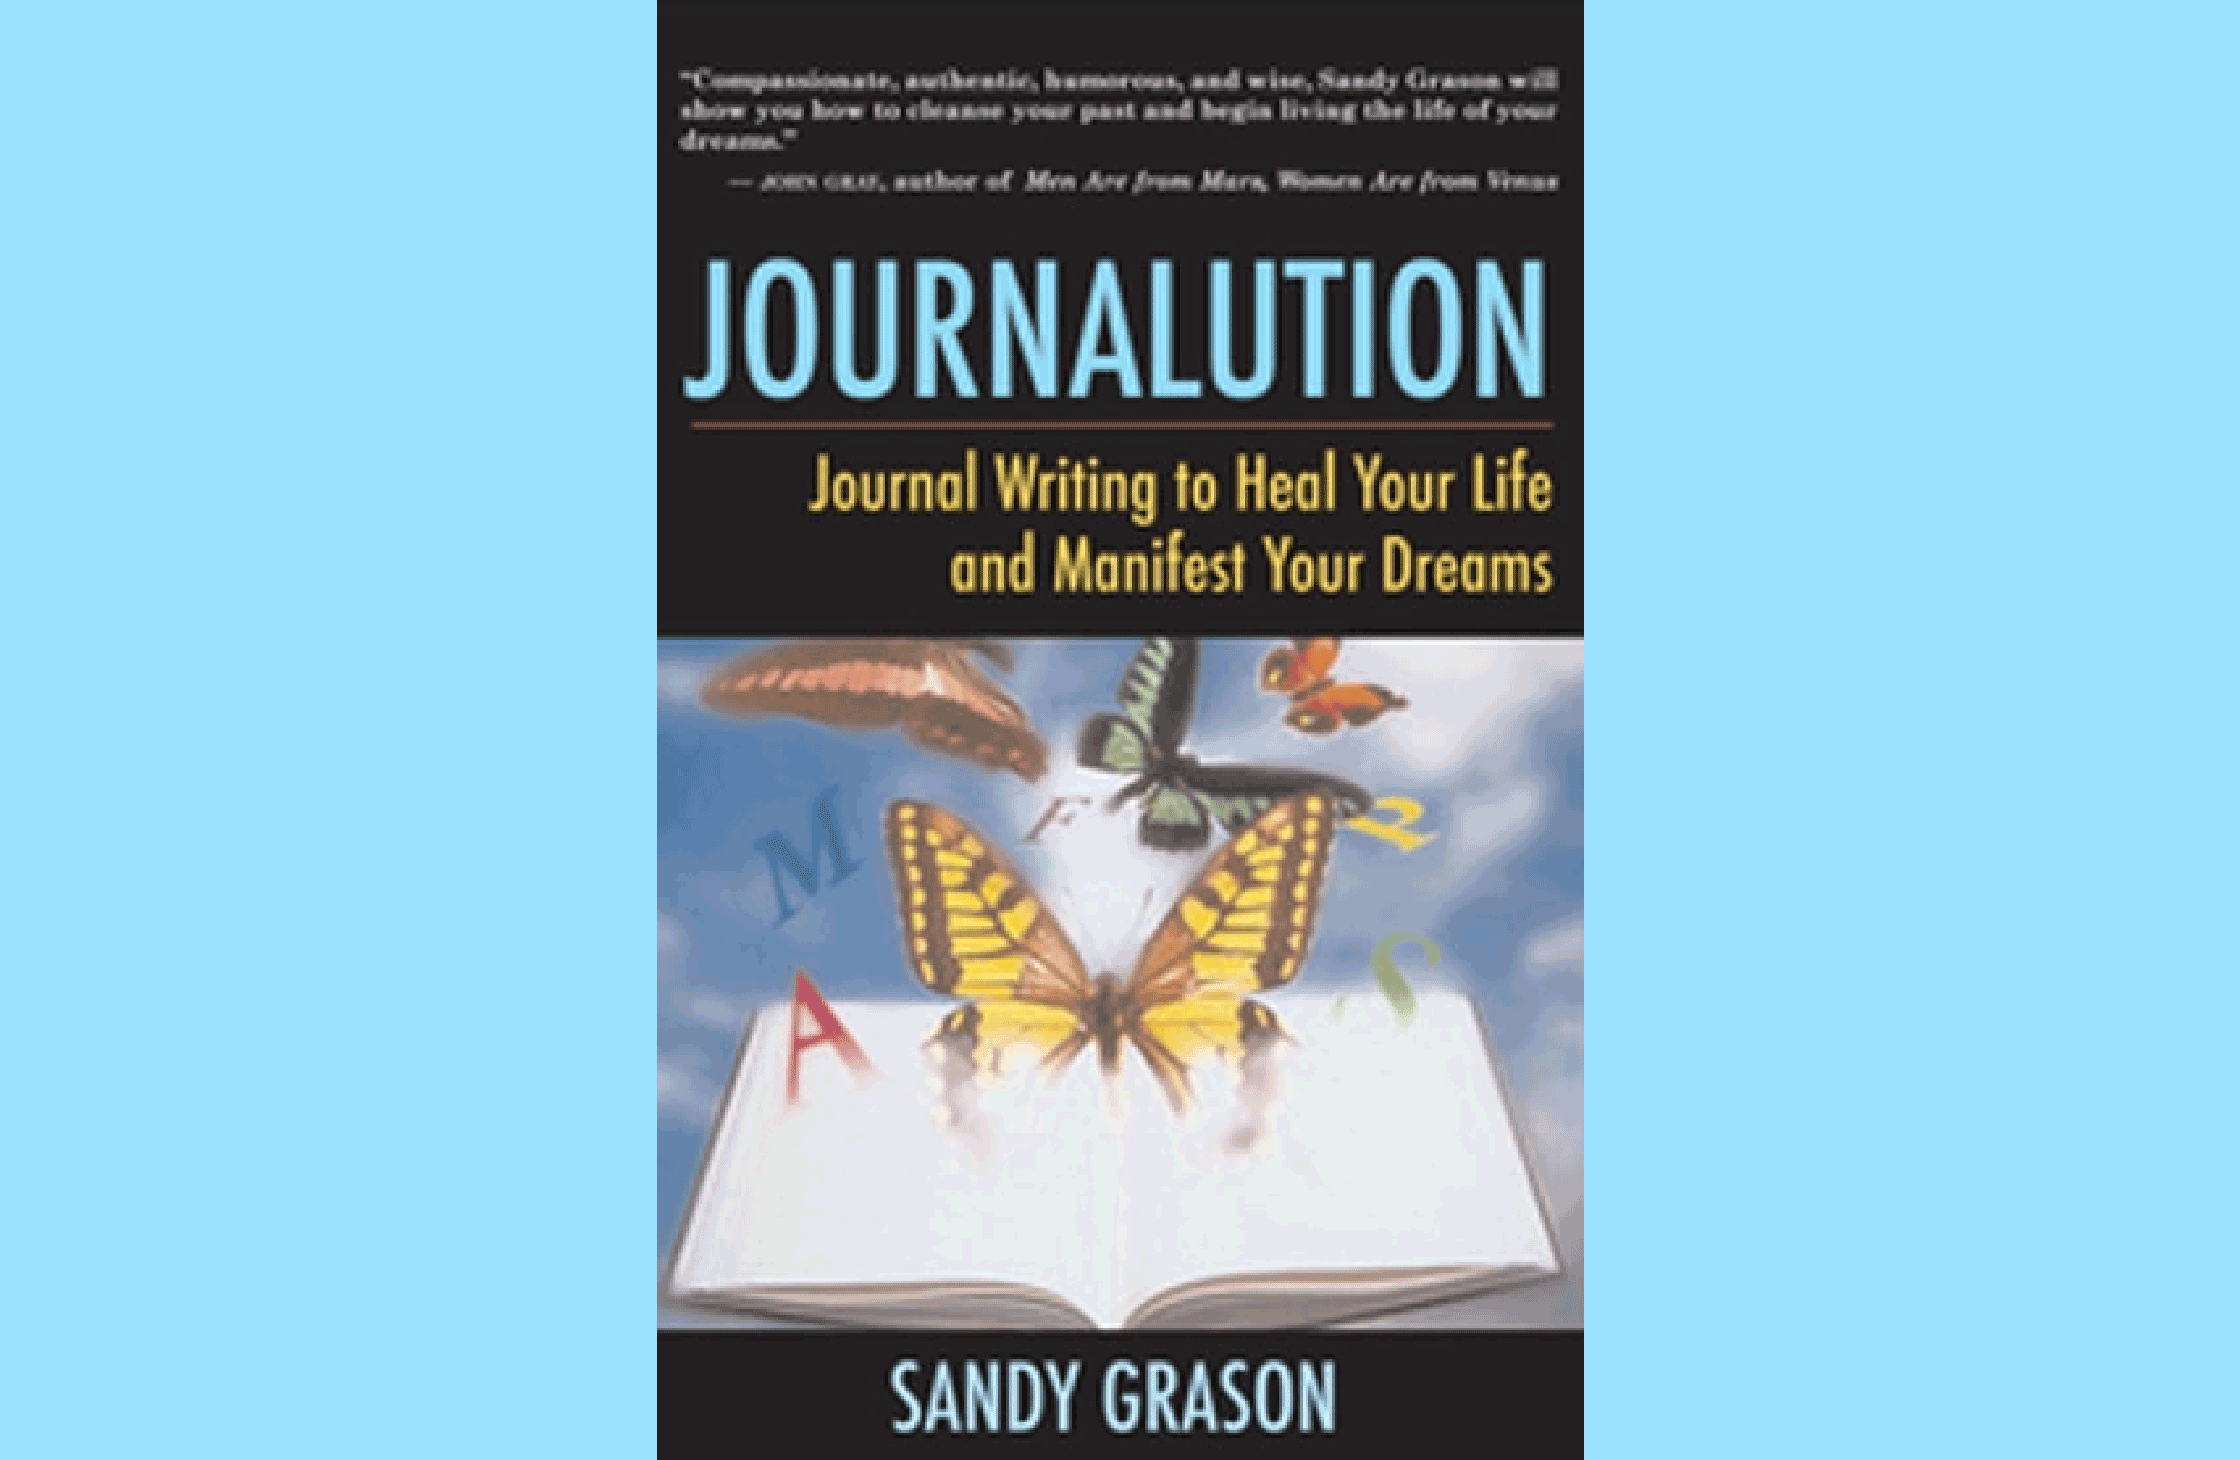 Summary: Journalution by Sandy Grason